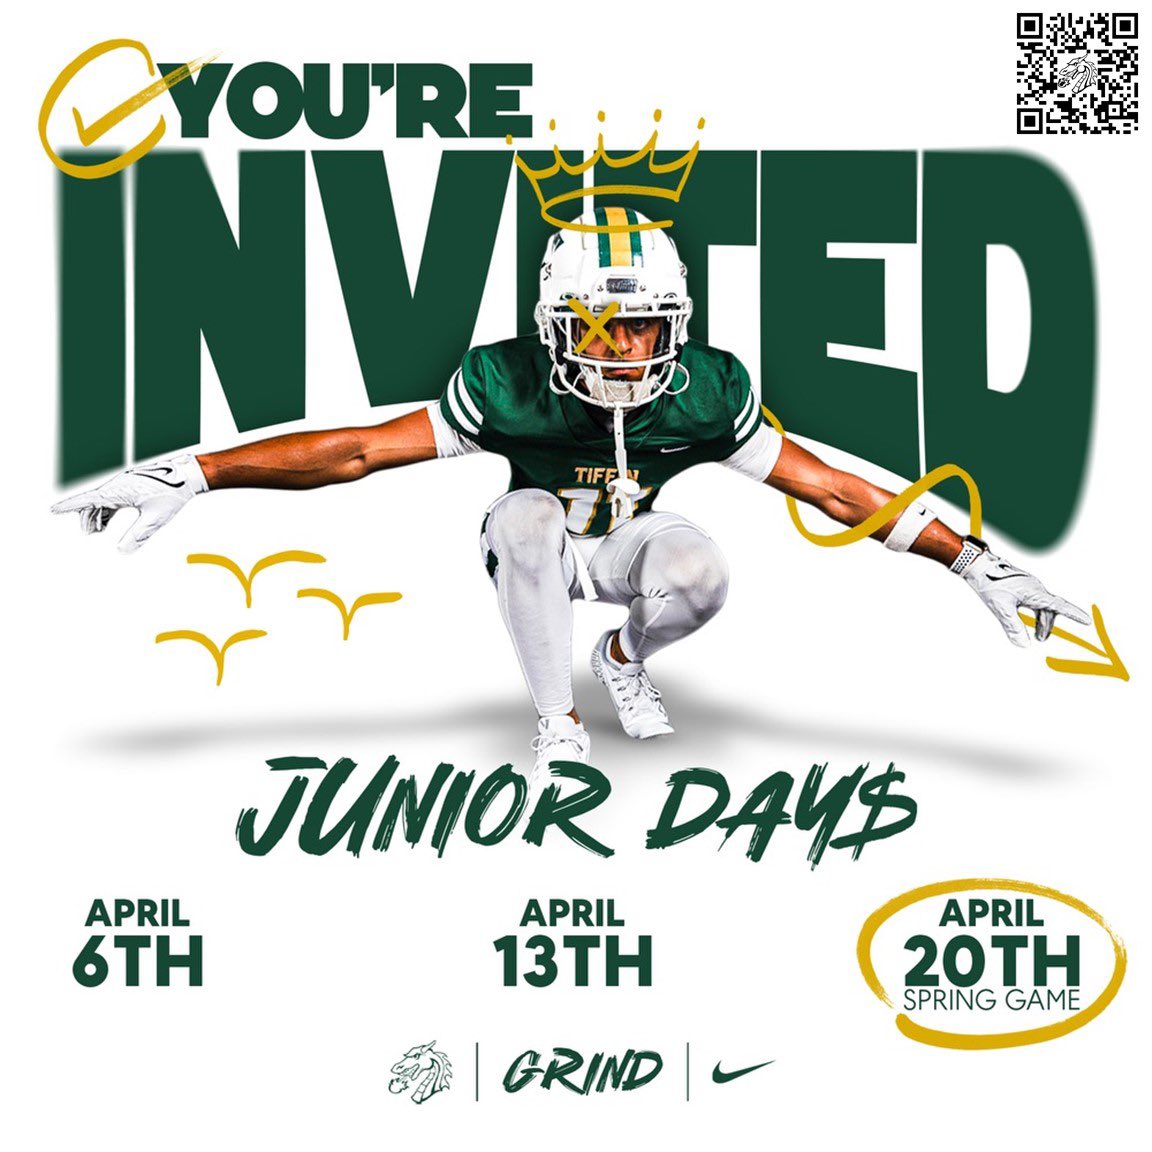 Our first Junior Day is this Saturday! Sign up for one of the dates using the QR code. We look forward to seeing 25’s on campus the next 3 Saturdays! #GRIND 🟢🟡🐲